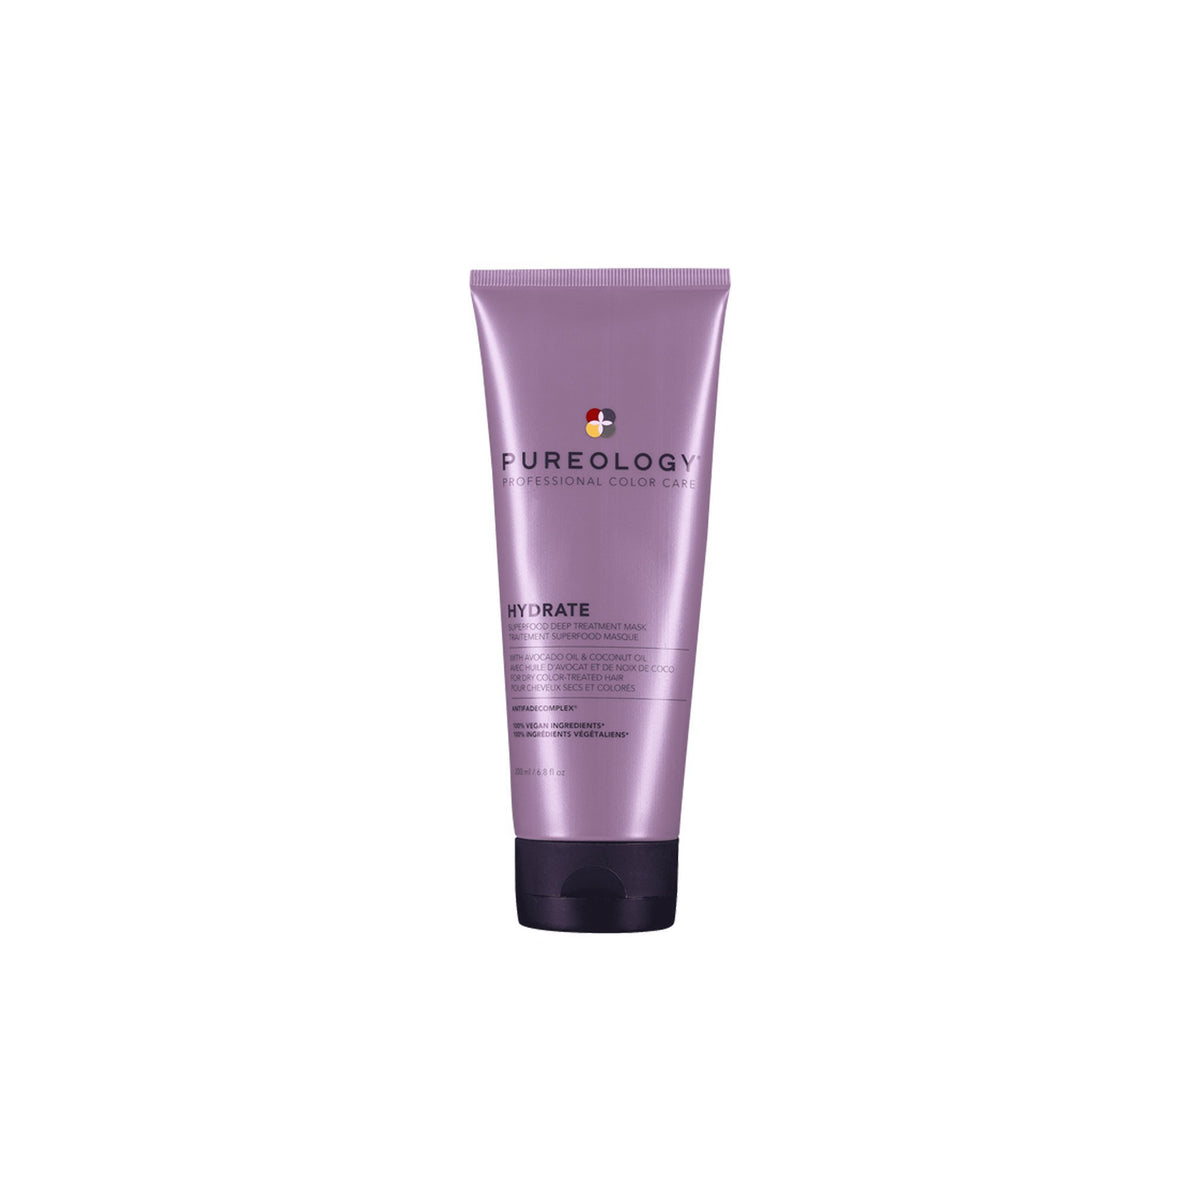 Pureology Hydrate Superfood Treatment - Shop online | Retail Box